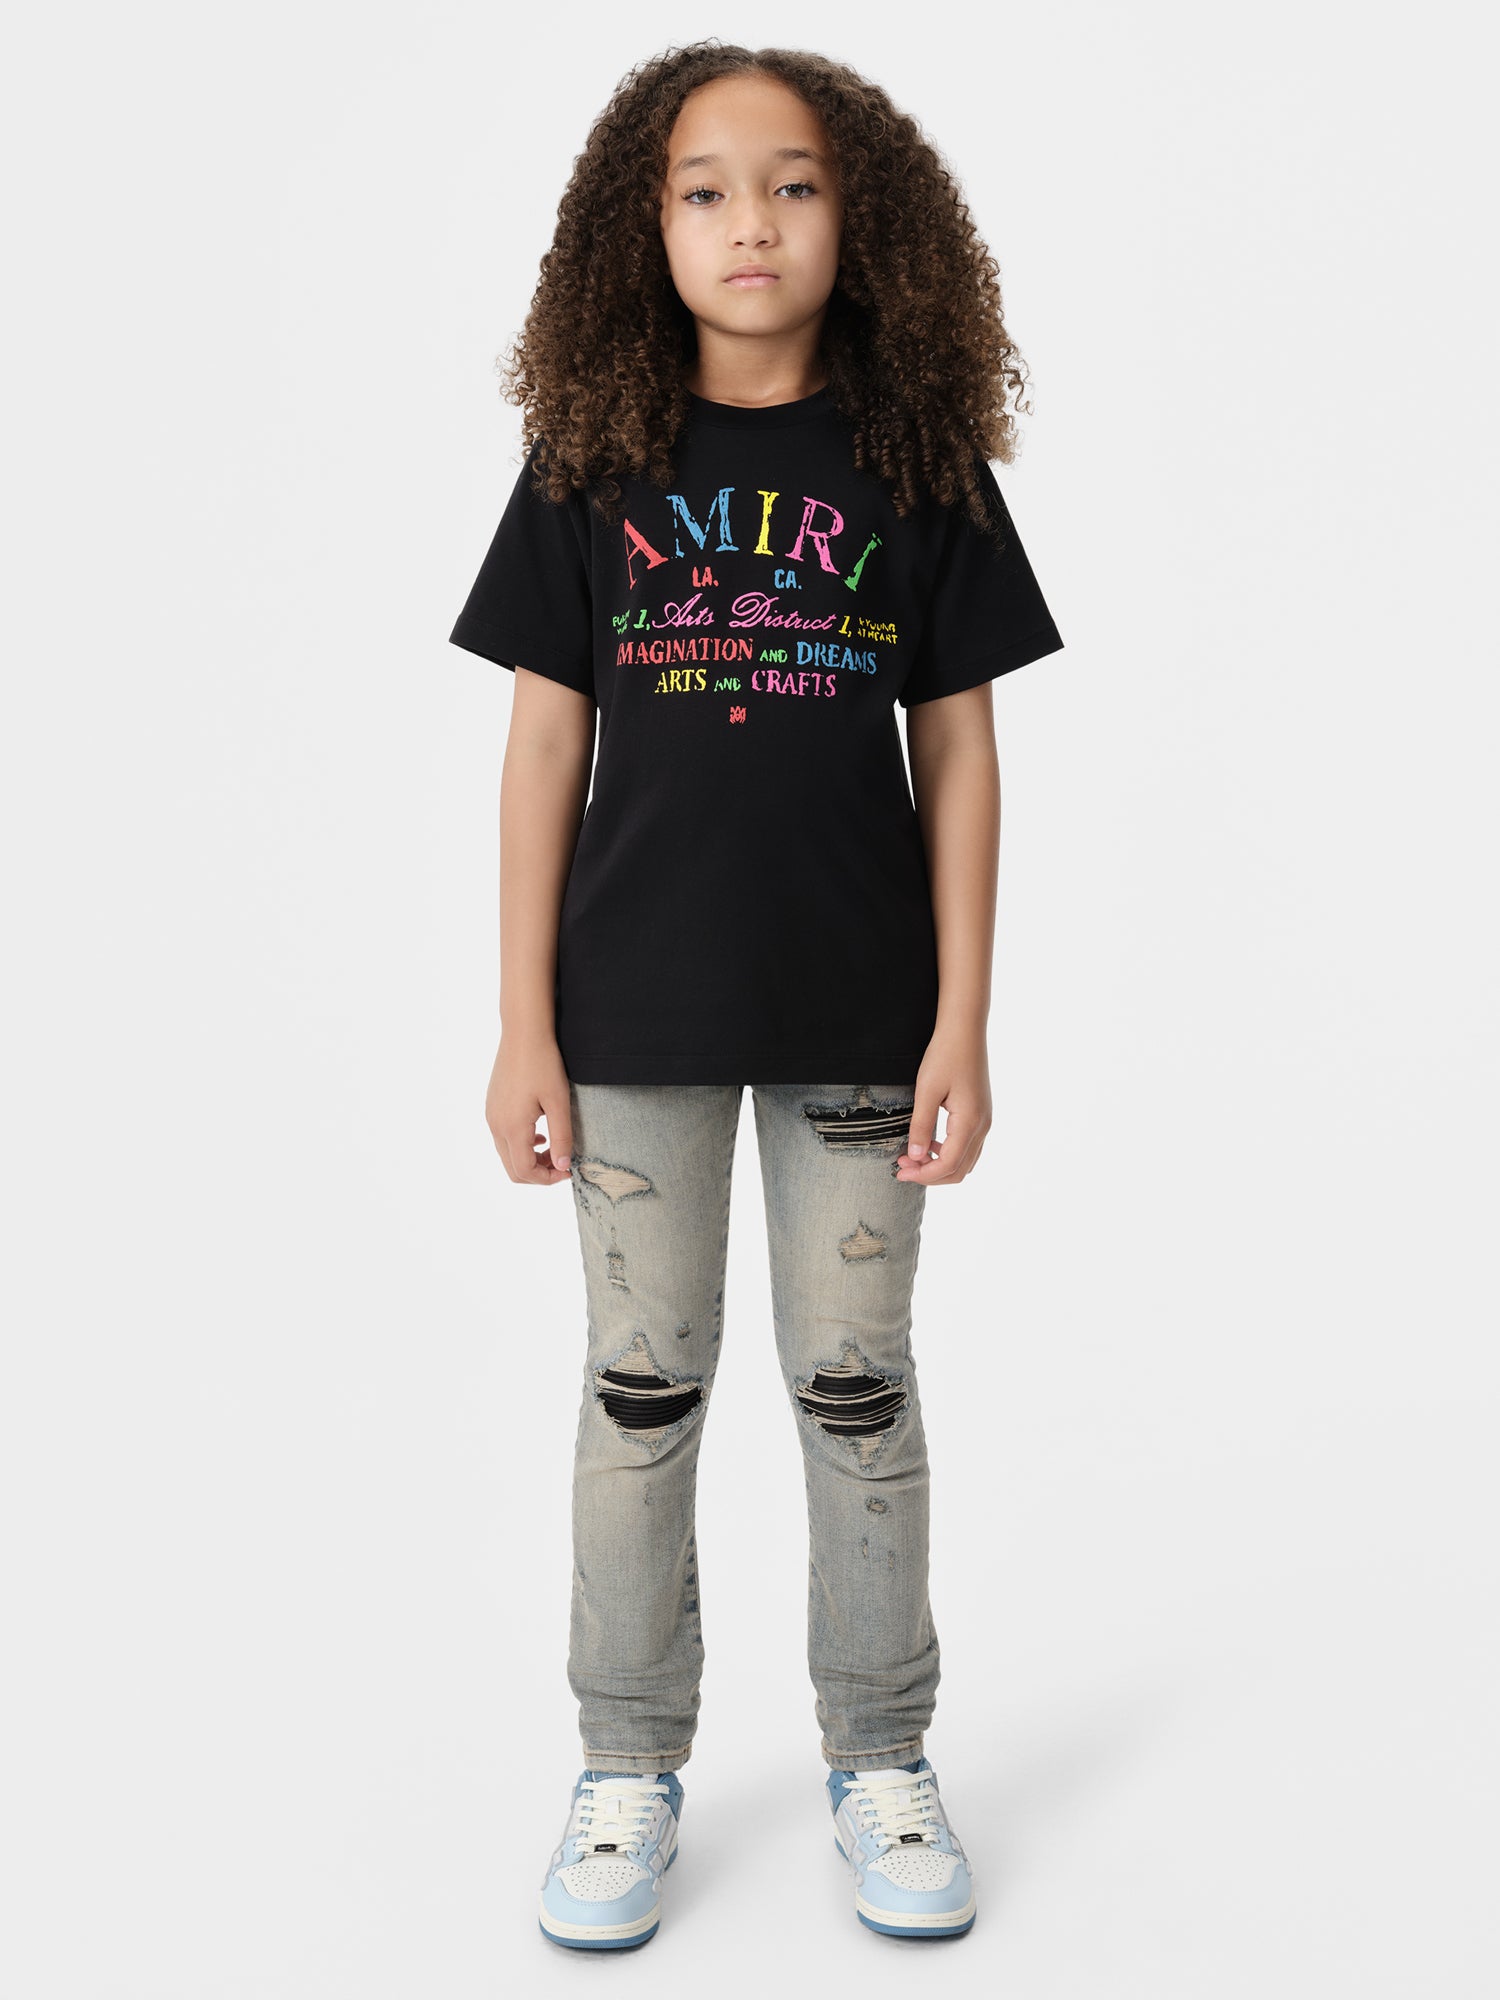 Product KIDS - KIDS' ARTS DISTRICT SCRIBBLE TEE - Black featured image